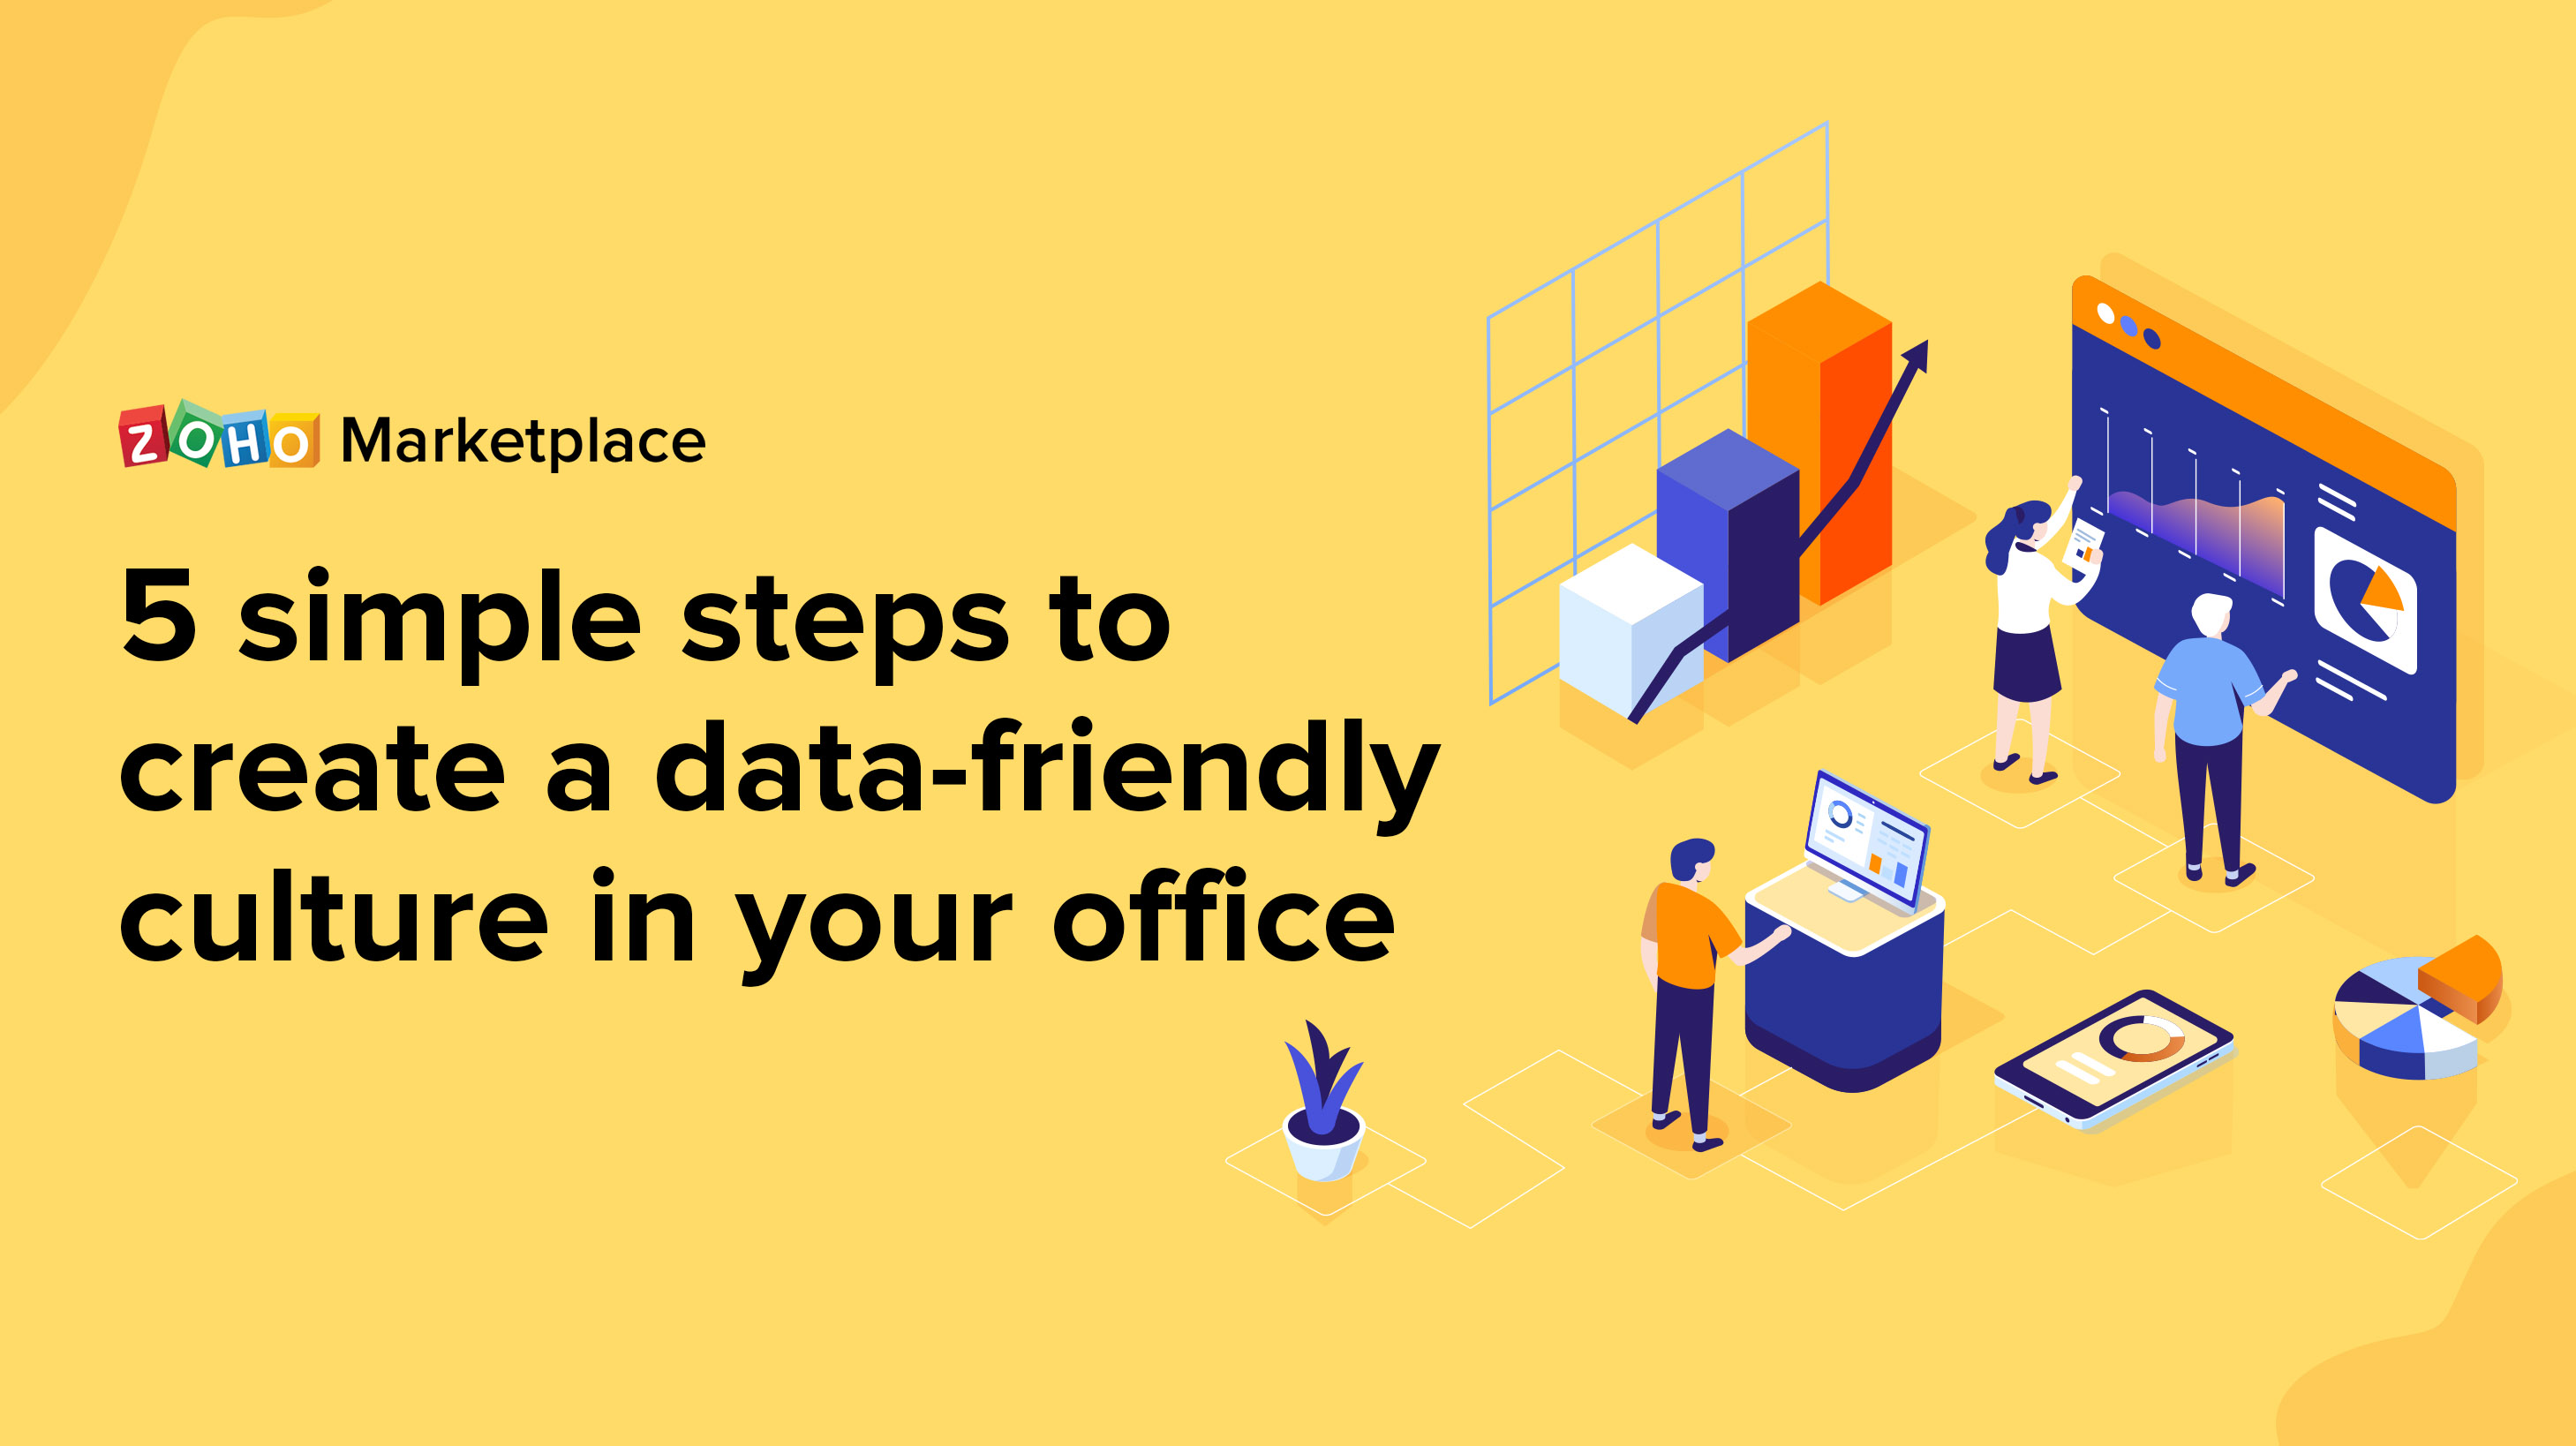 ProTips: 5 simple steps to create a data-friendly culture in your office  